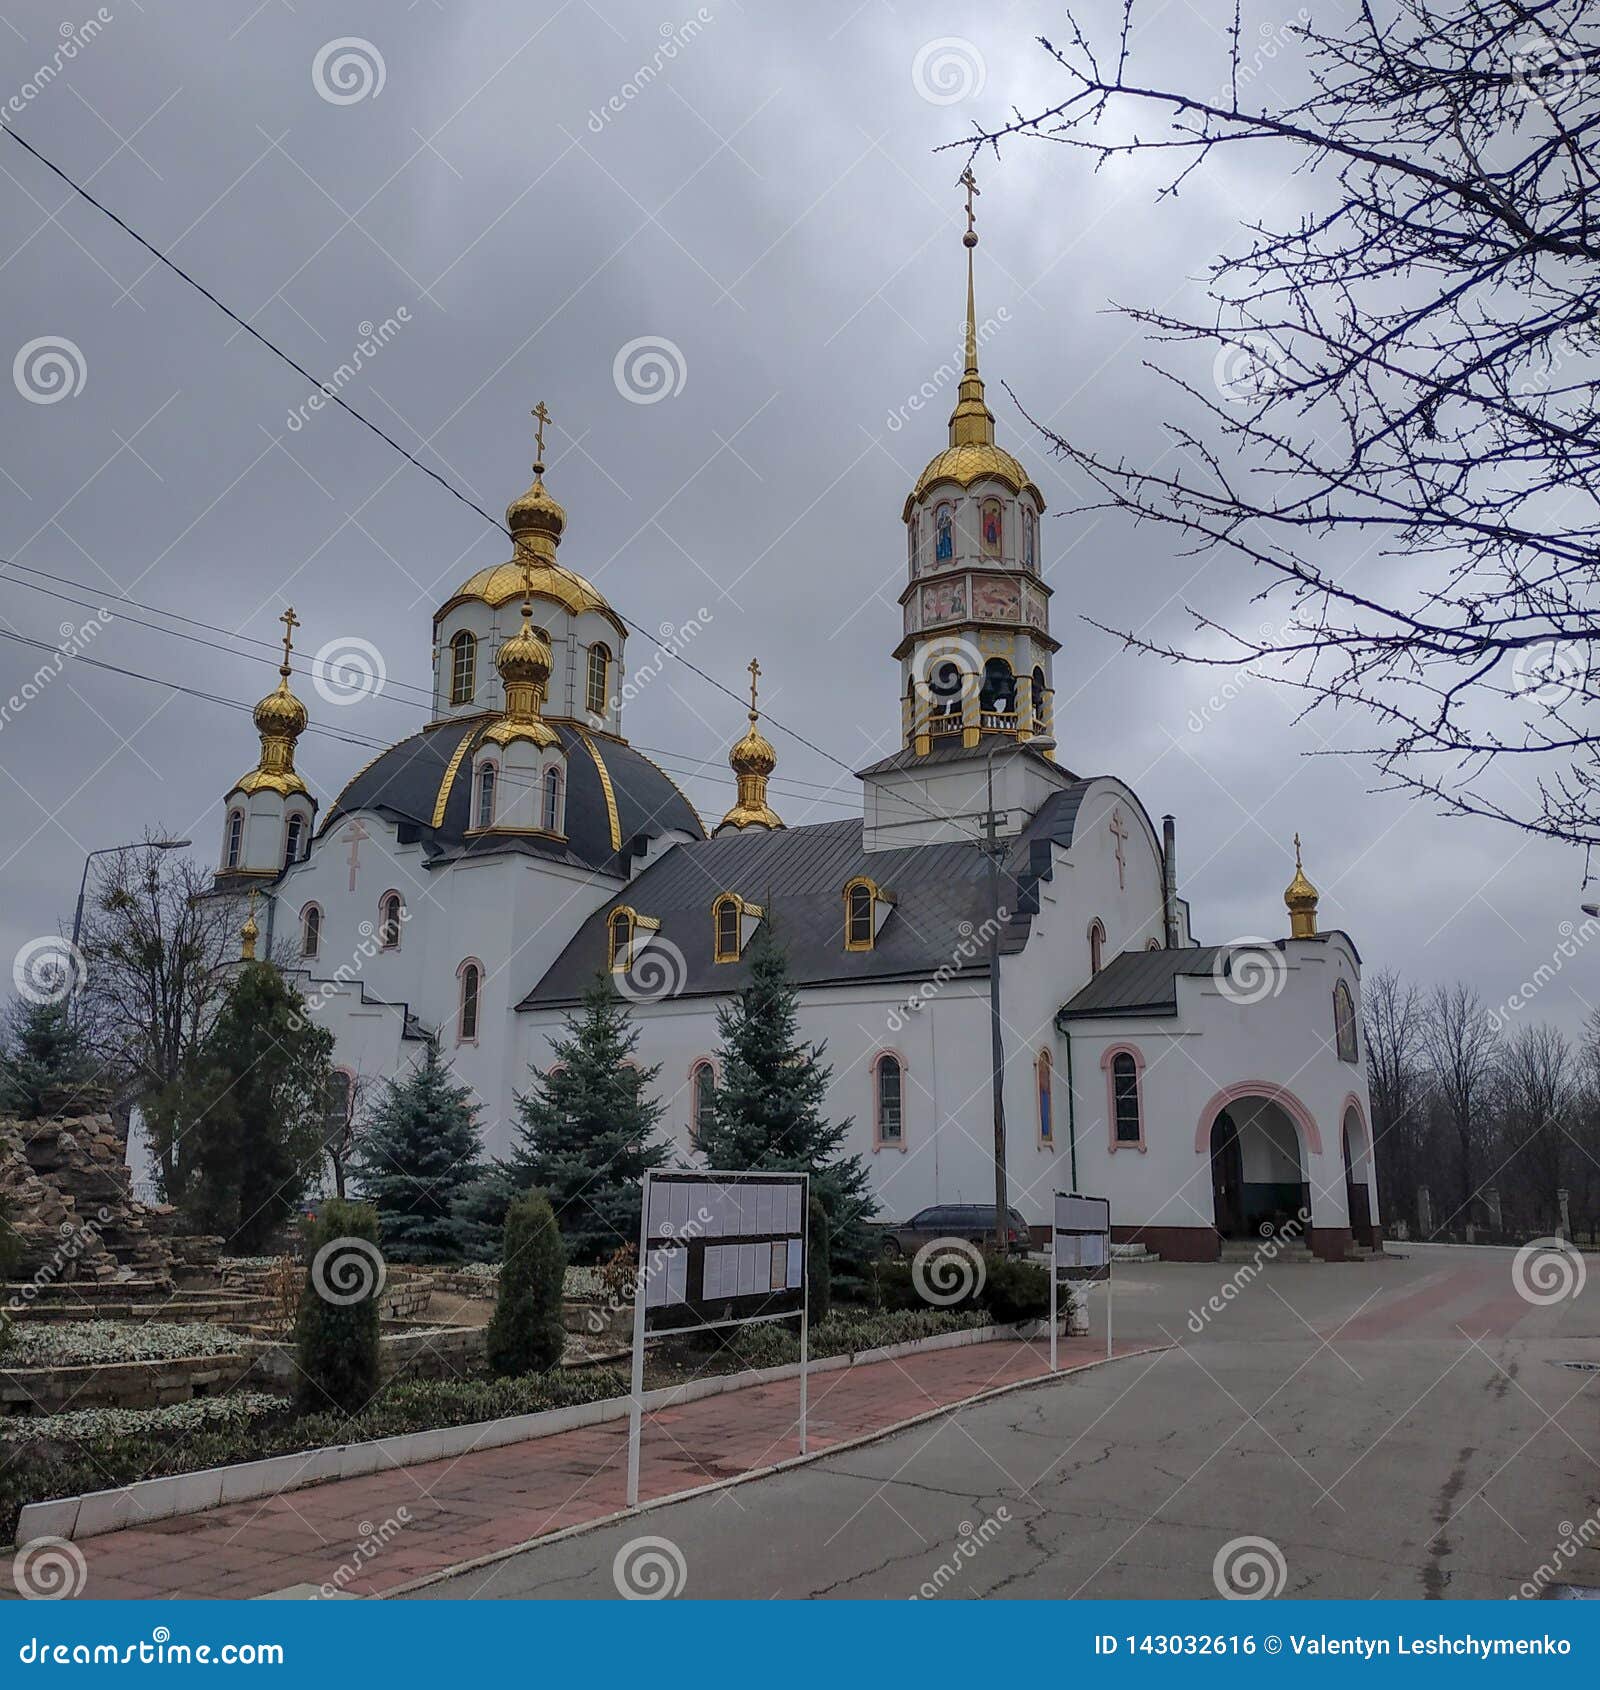 holy trinity cathedral in kramatorsk, cloudy day, march